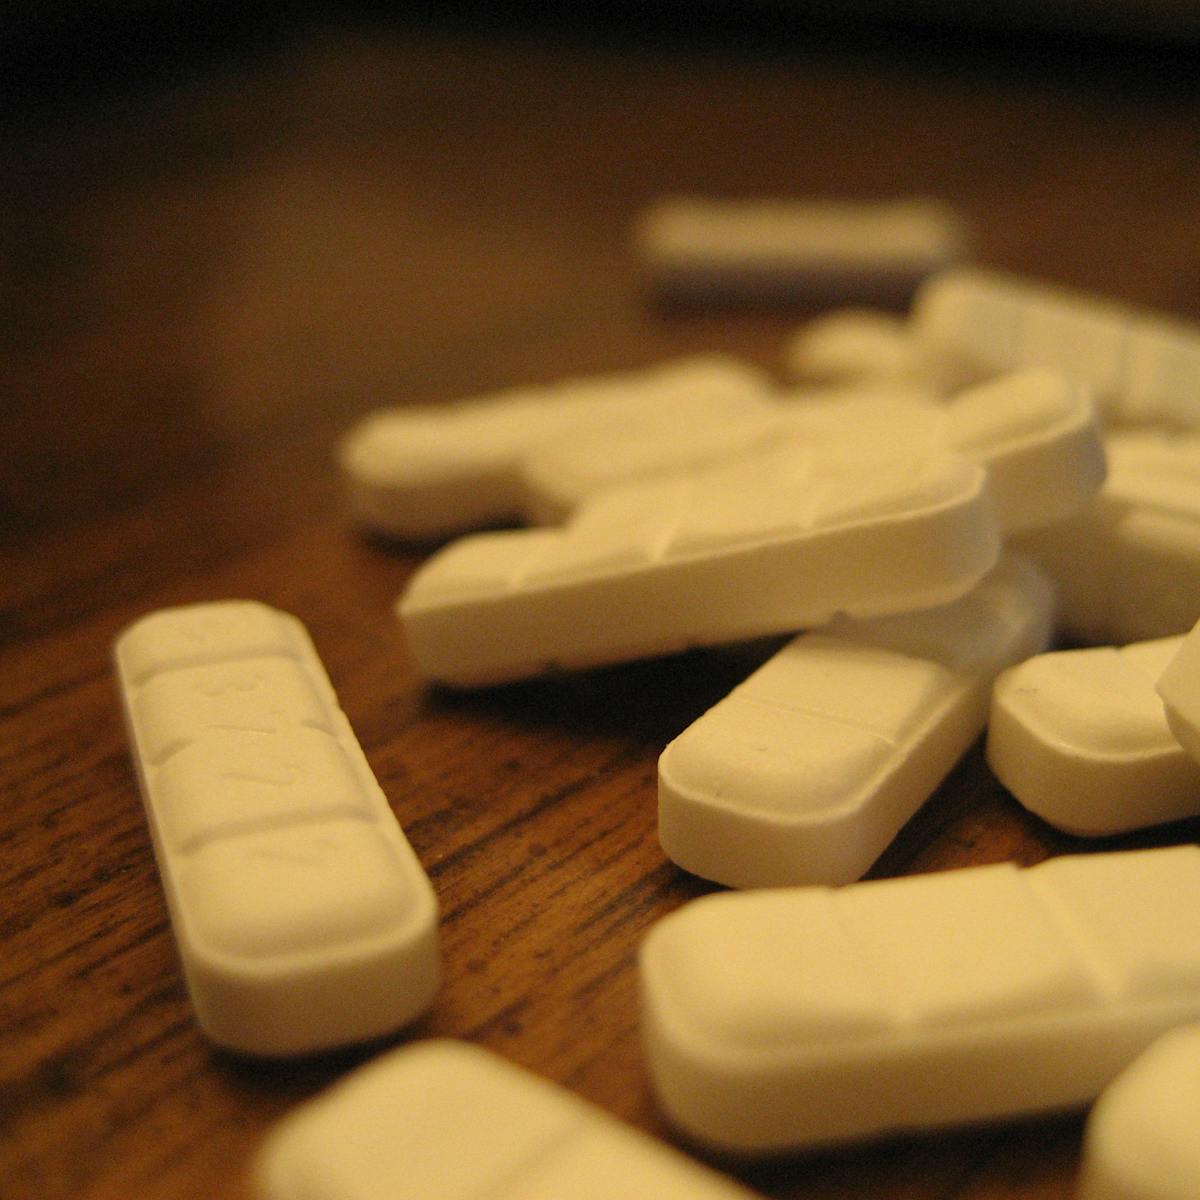 Xanax: how does it work and what are the side effects?